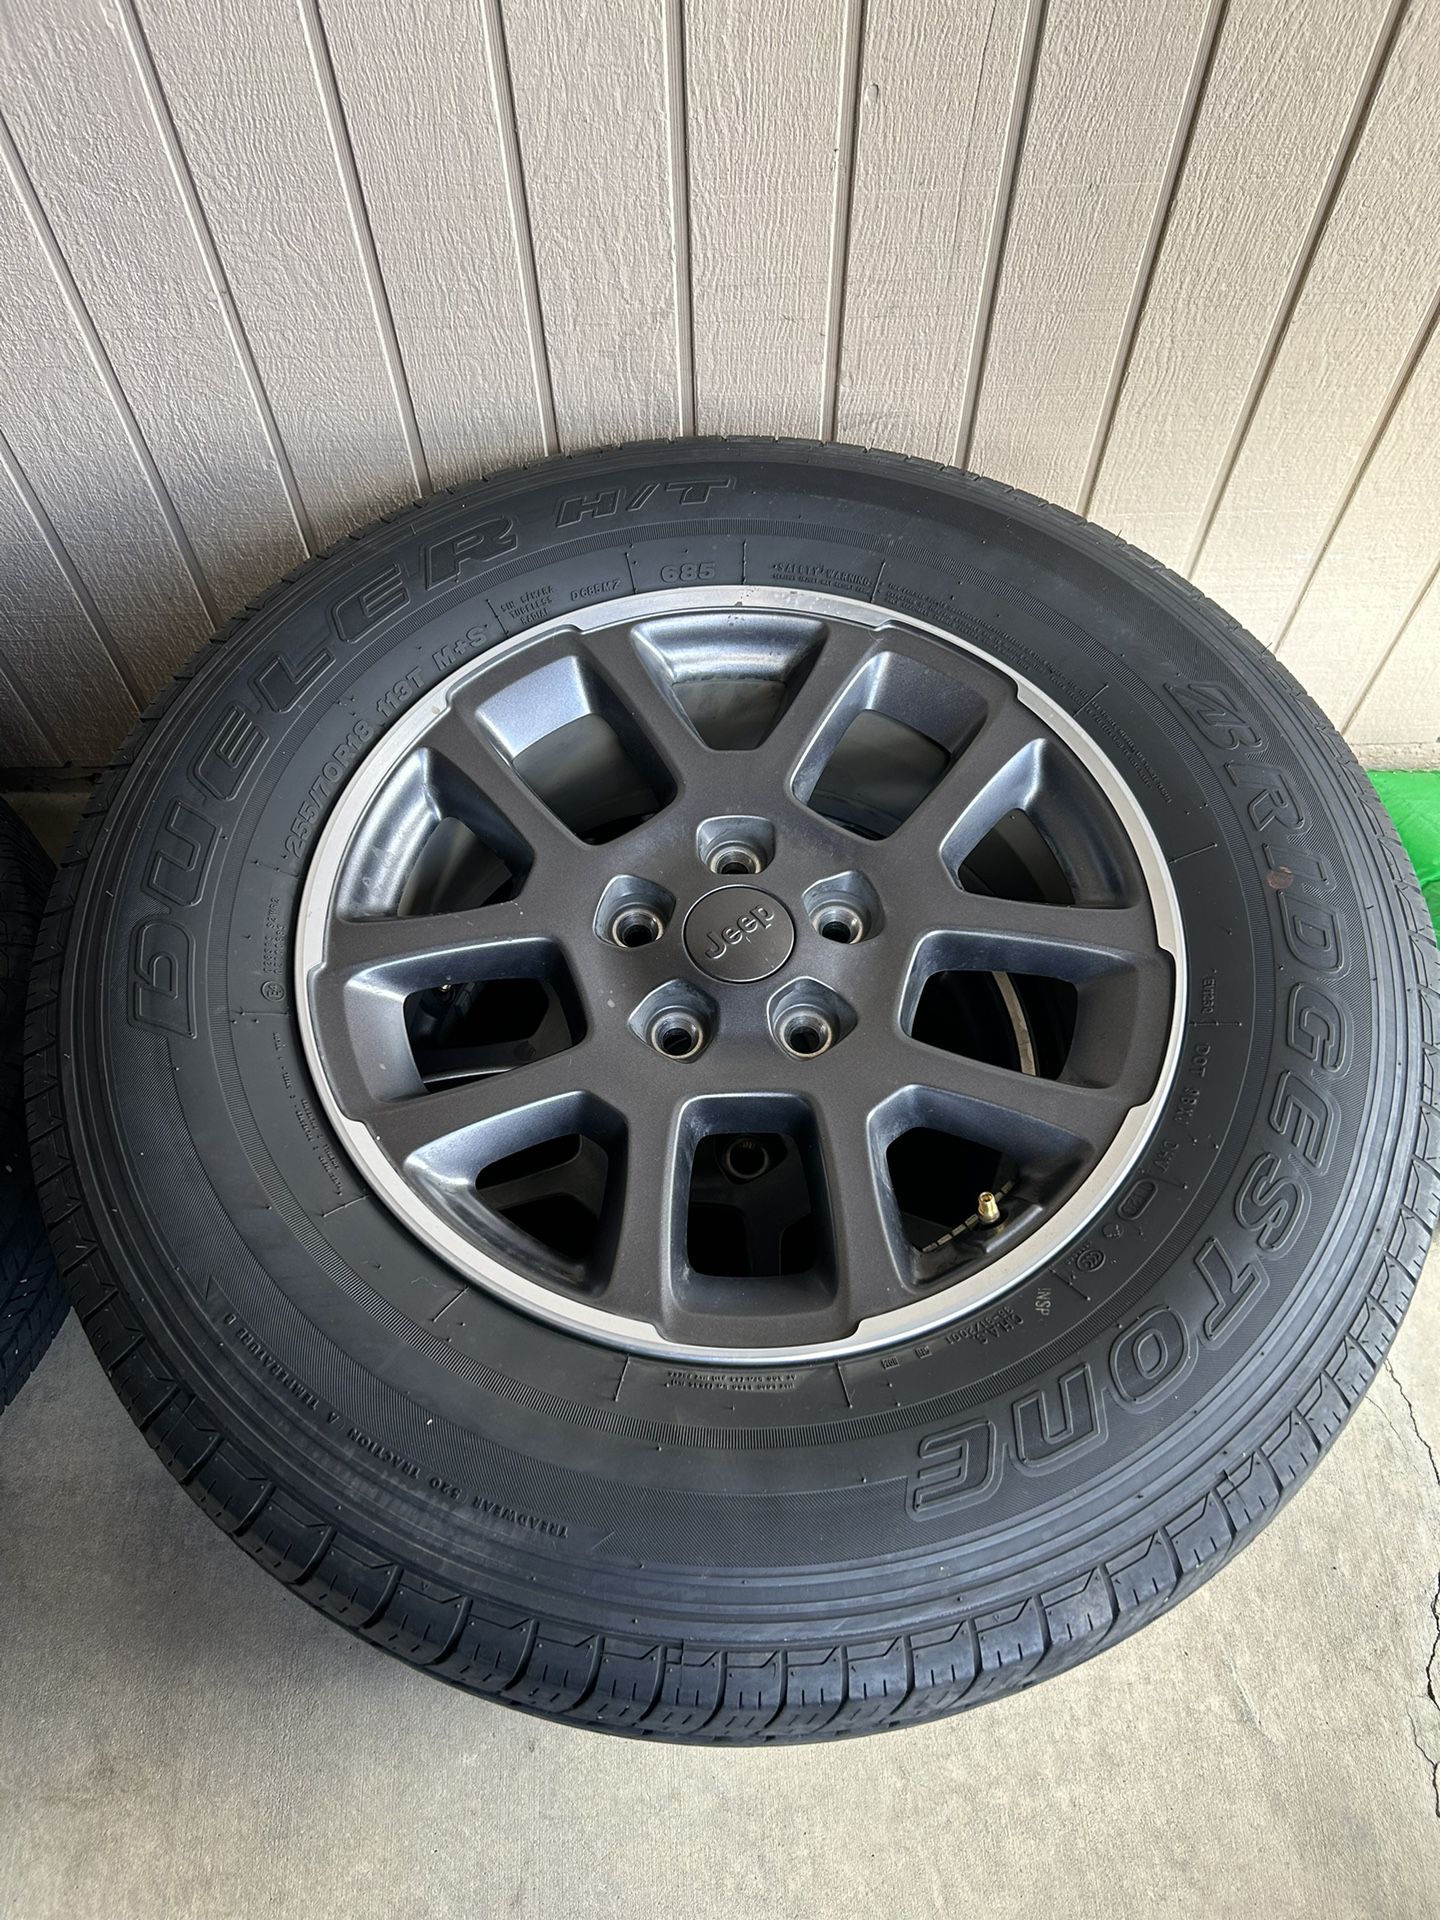 2021 Jeep Gladiator Overland OEM wheels and tires